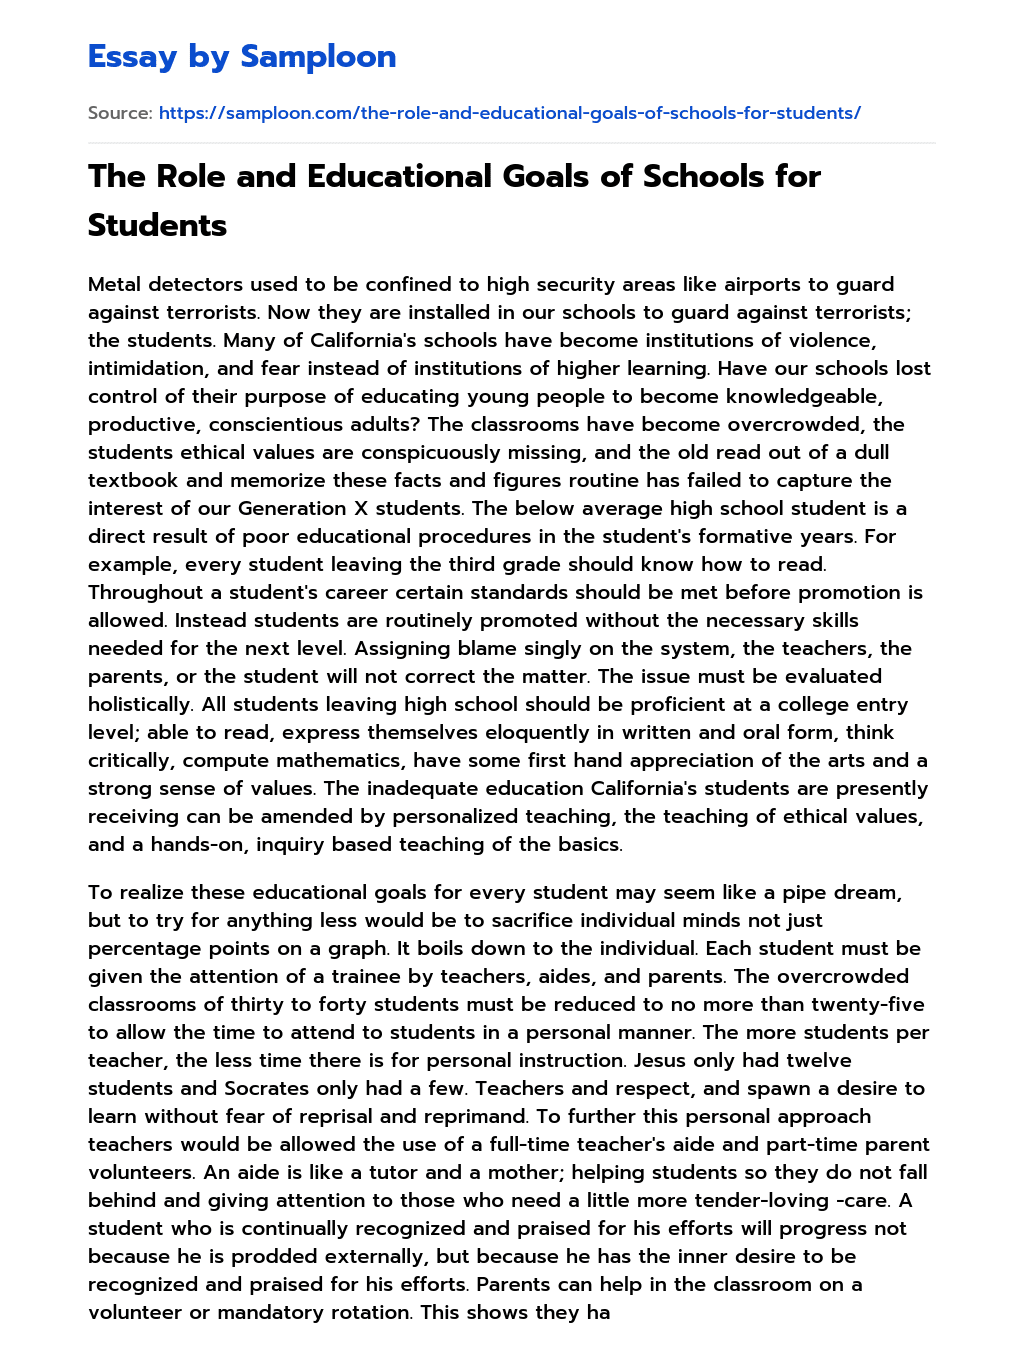 The Role and Educational Goals of Schools for Students essay